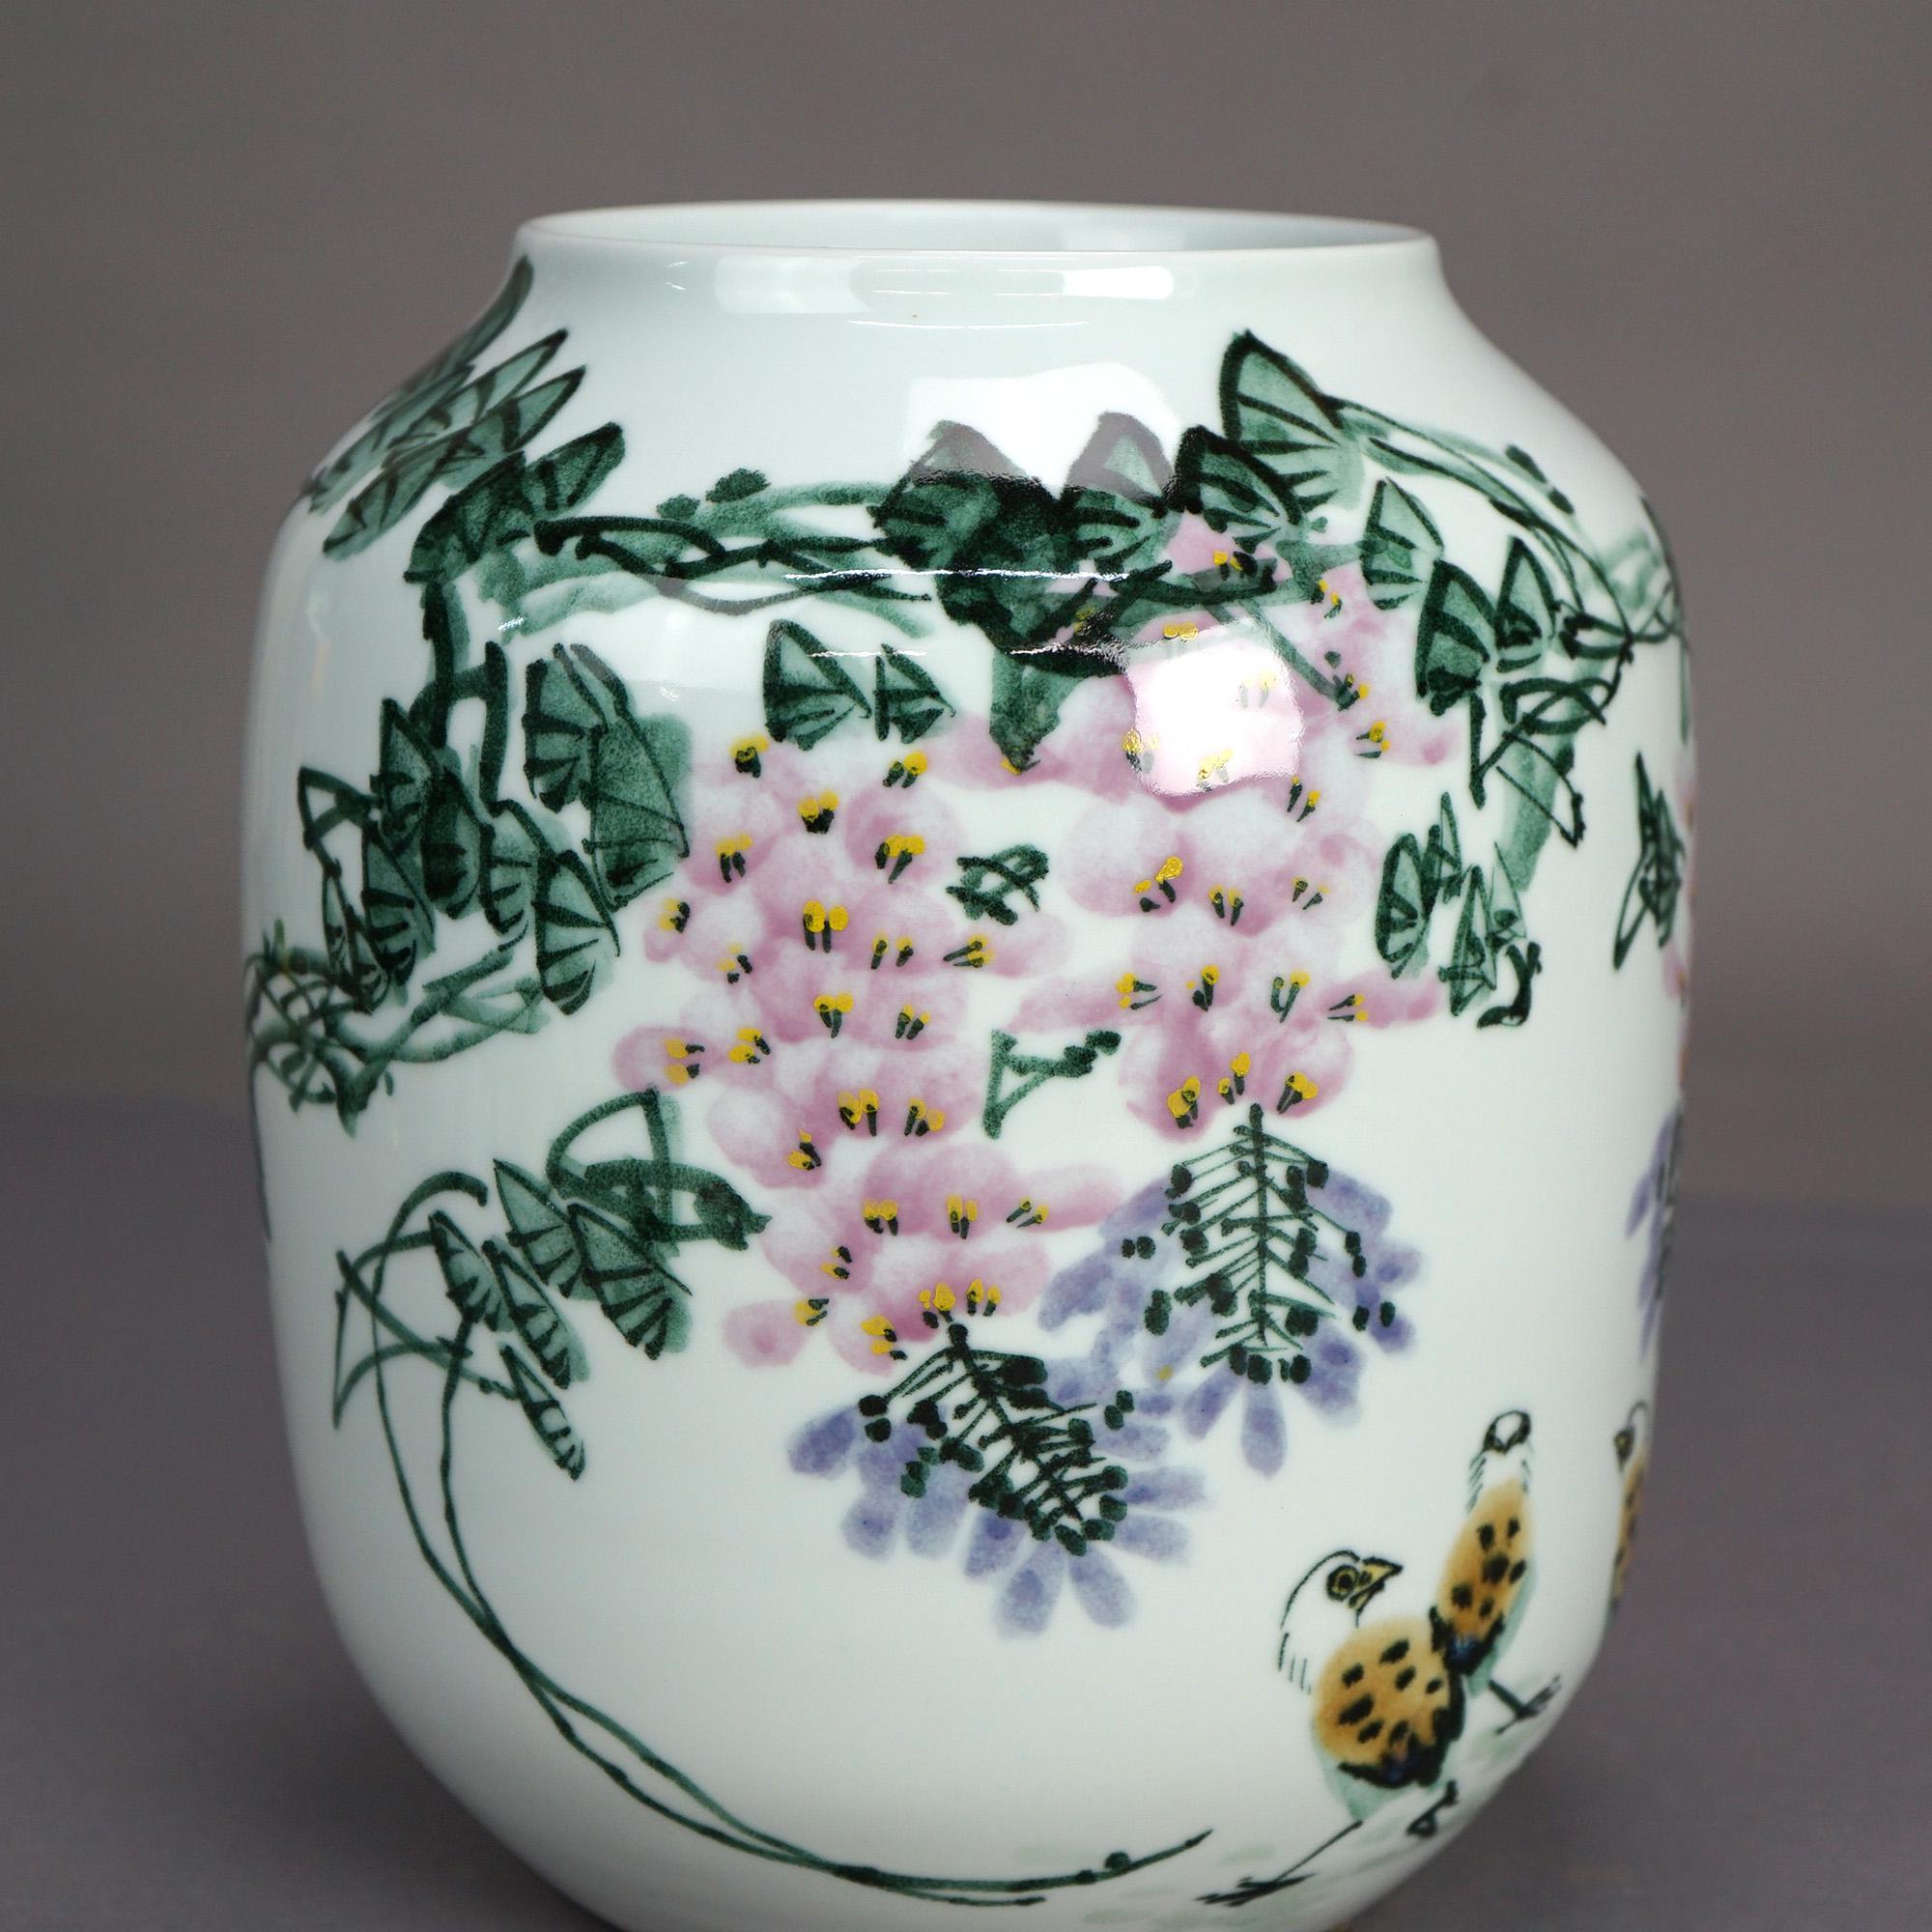 Hand-Painted Chinese Jingdezhen Porcelain Jar Vase with Hand Painted Myrtle Design 20thC For Sale